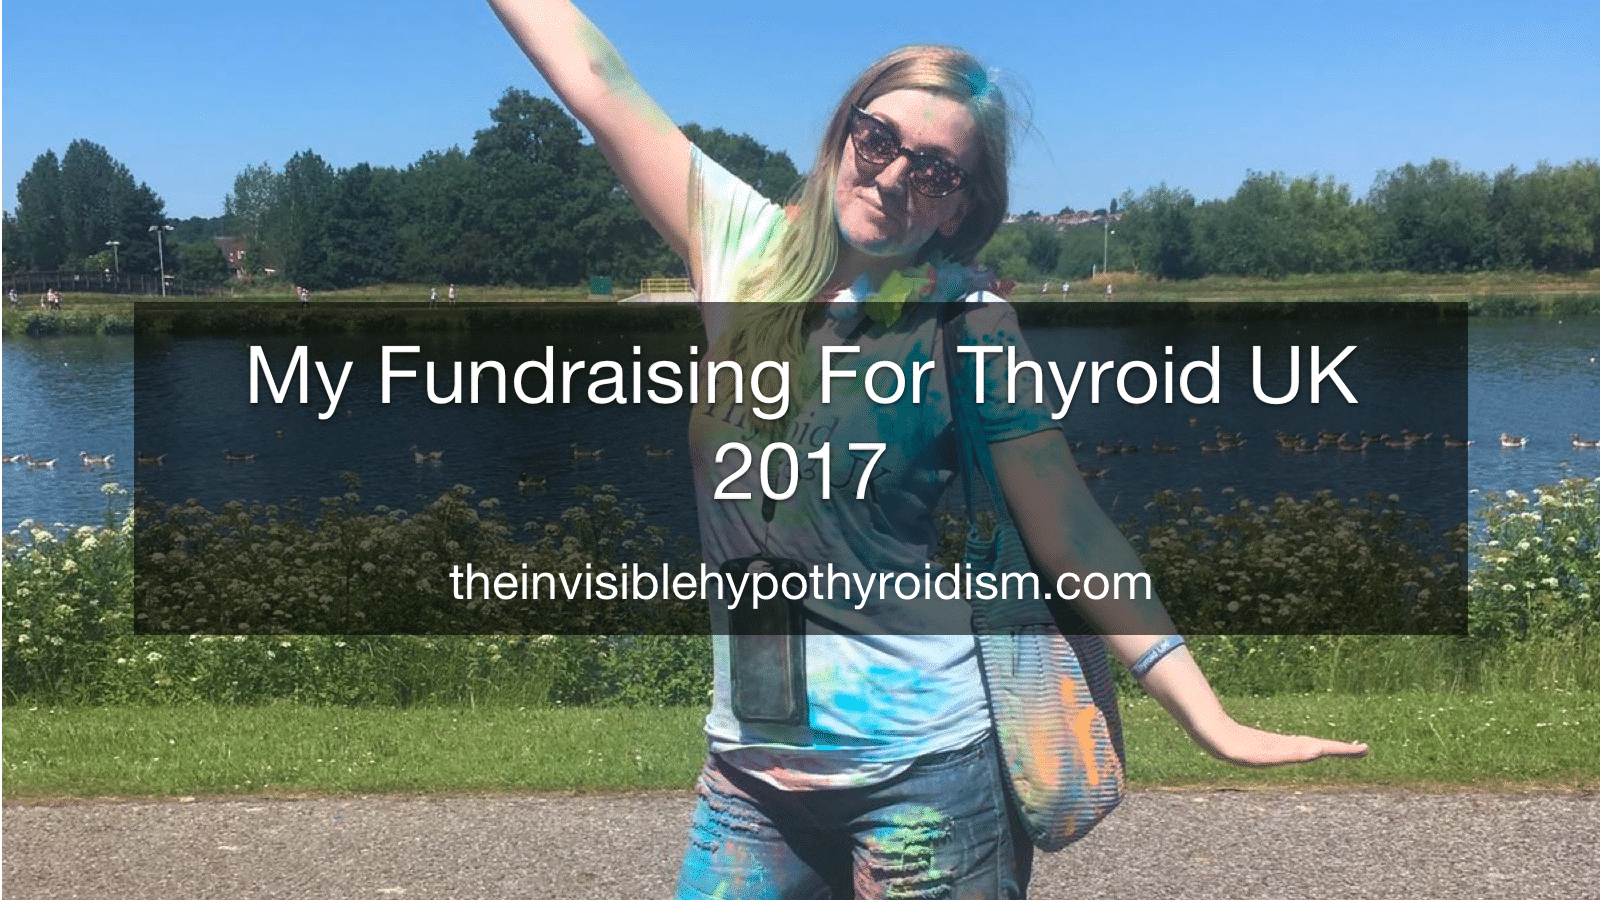 My Fundraising For Thyroid UK 2017